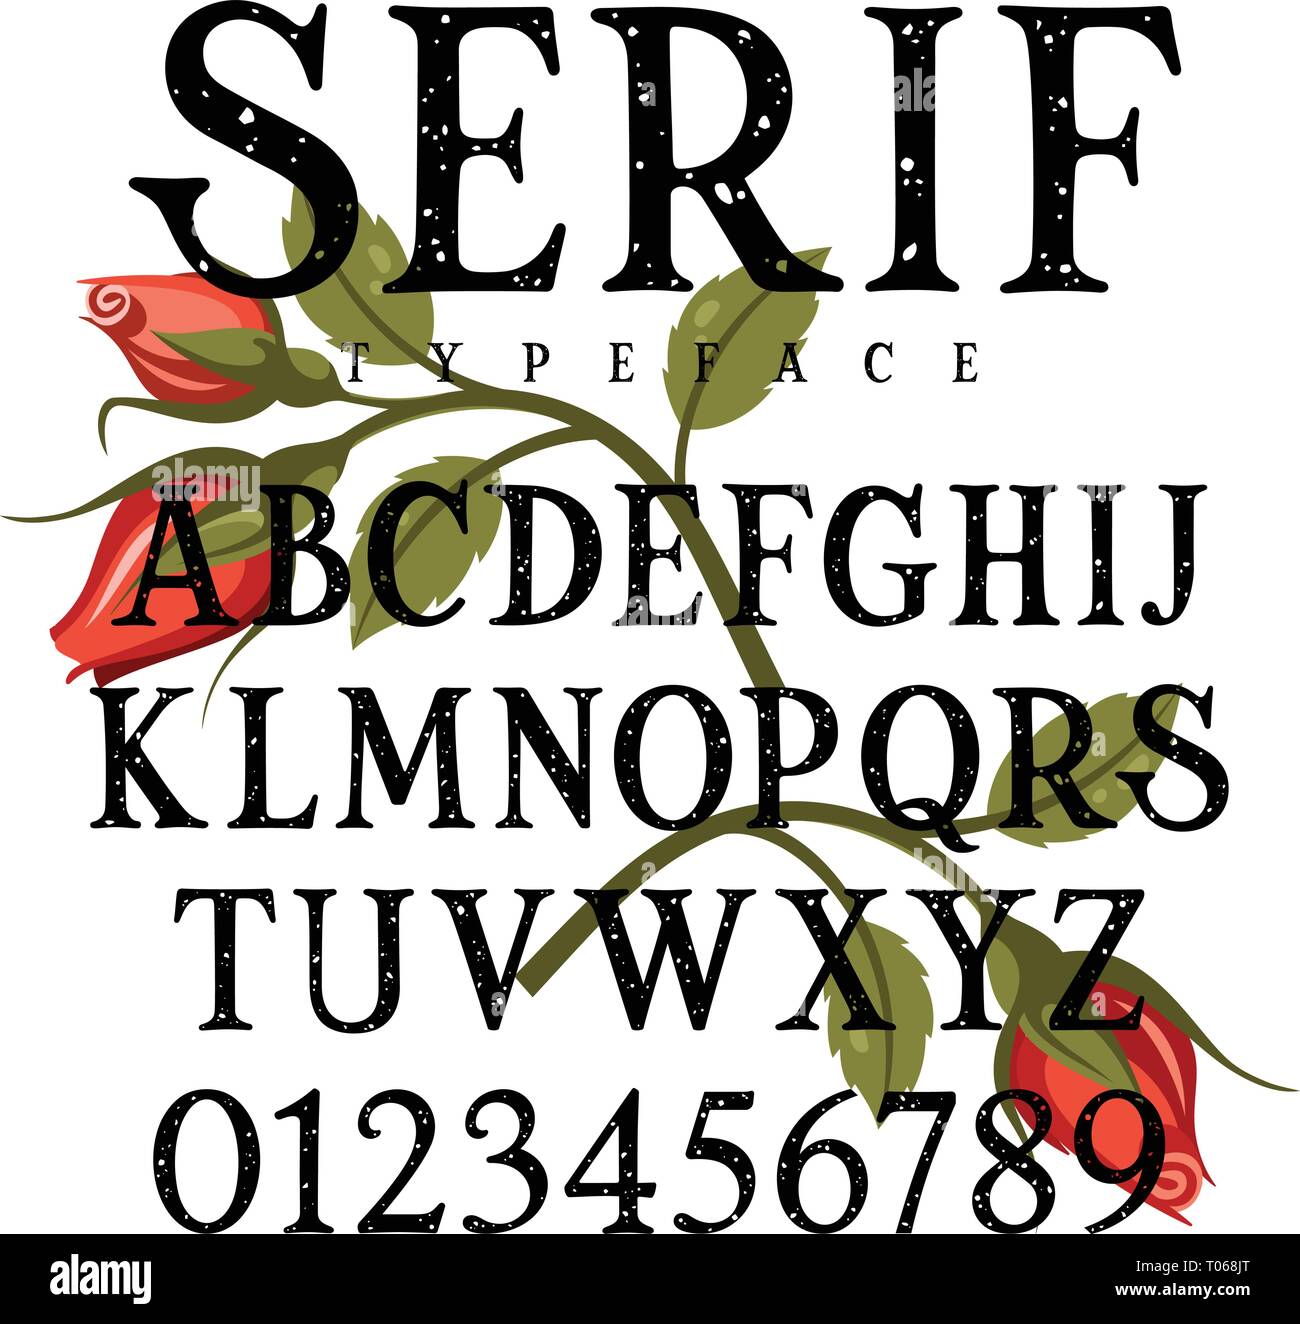 Grunge textured serif font. Handmade vector alphabet with red roses as decoration. Use for t-shirt design, posters and other uses Stock Vector